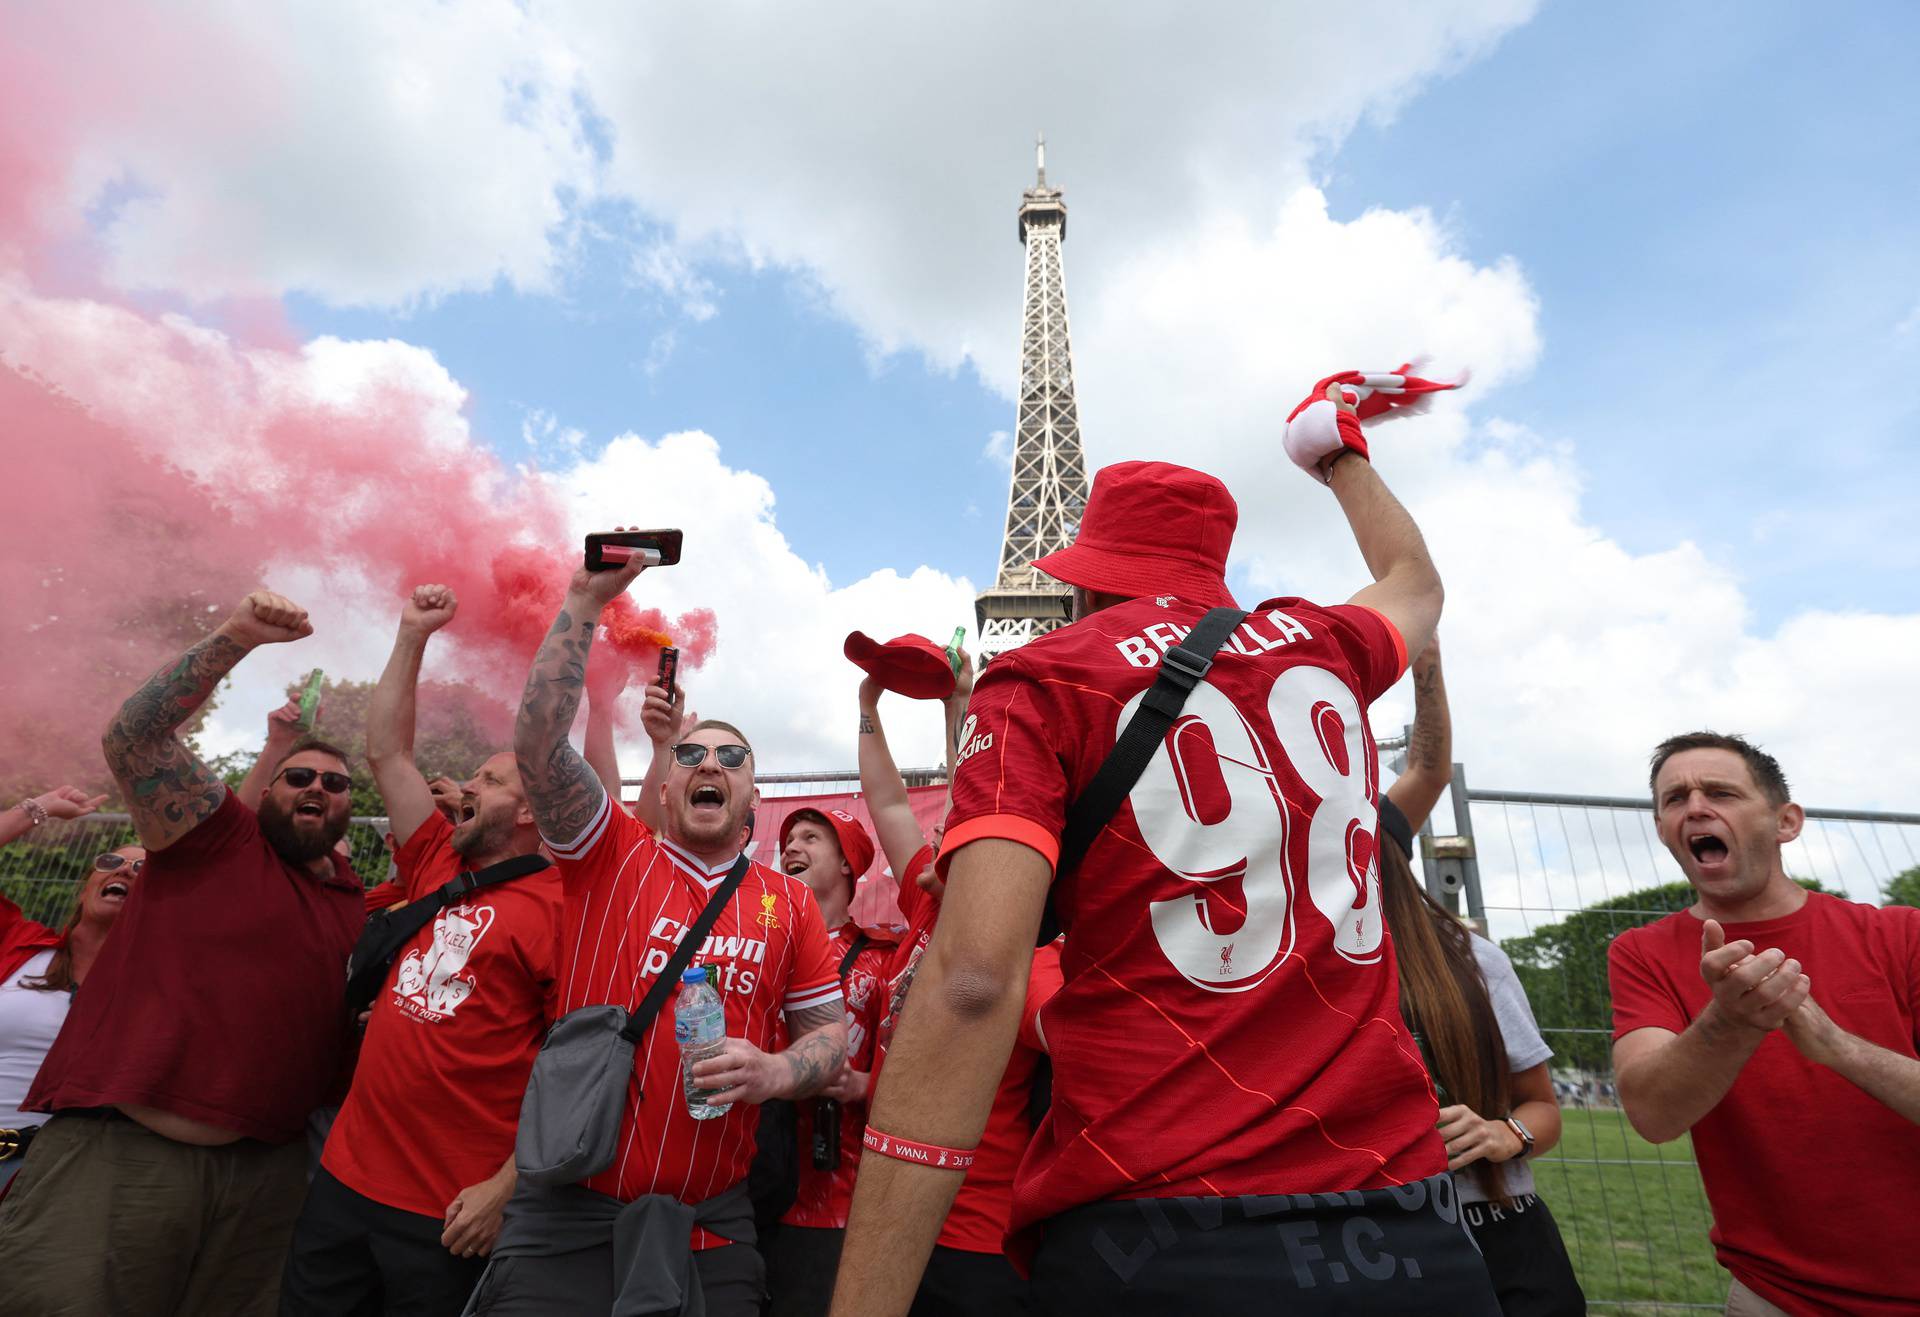 Champions League - Final - Fans gather in Paris for Liverpool v Real Madrid in the Champions League Final